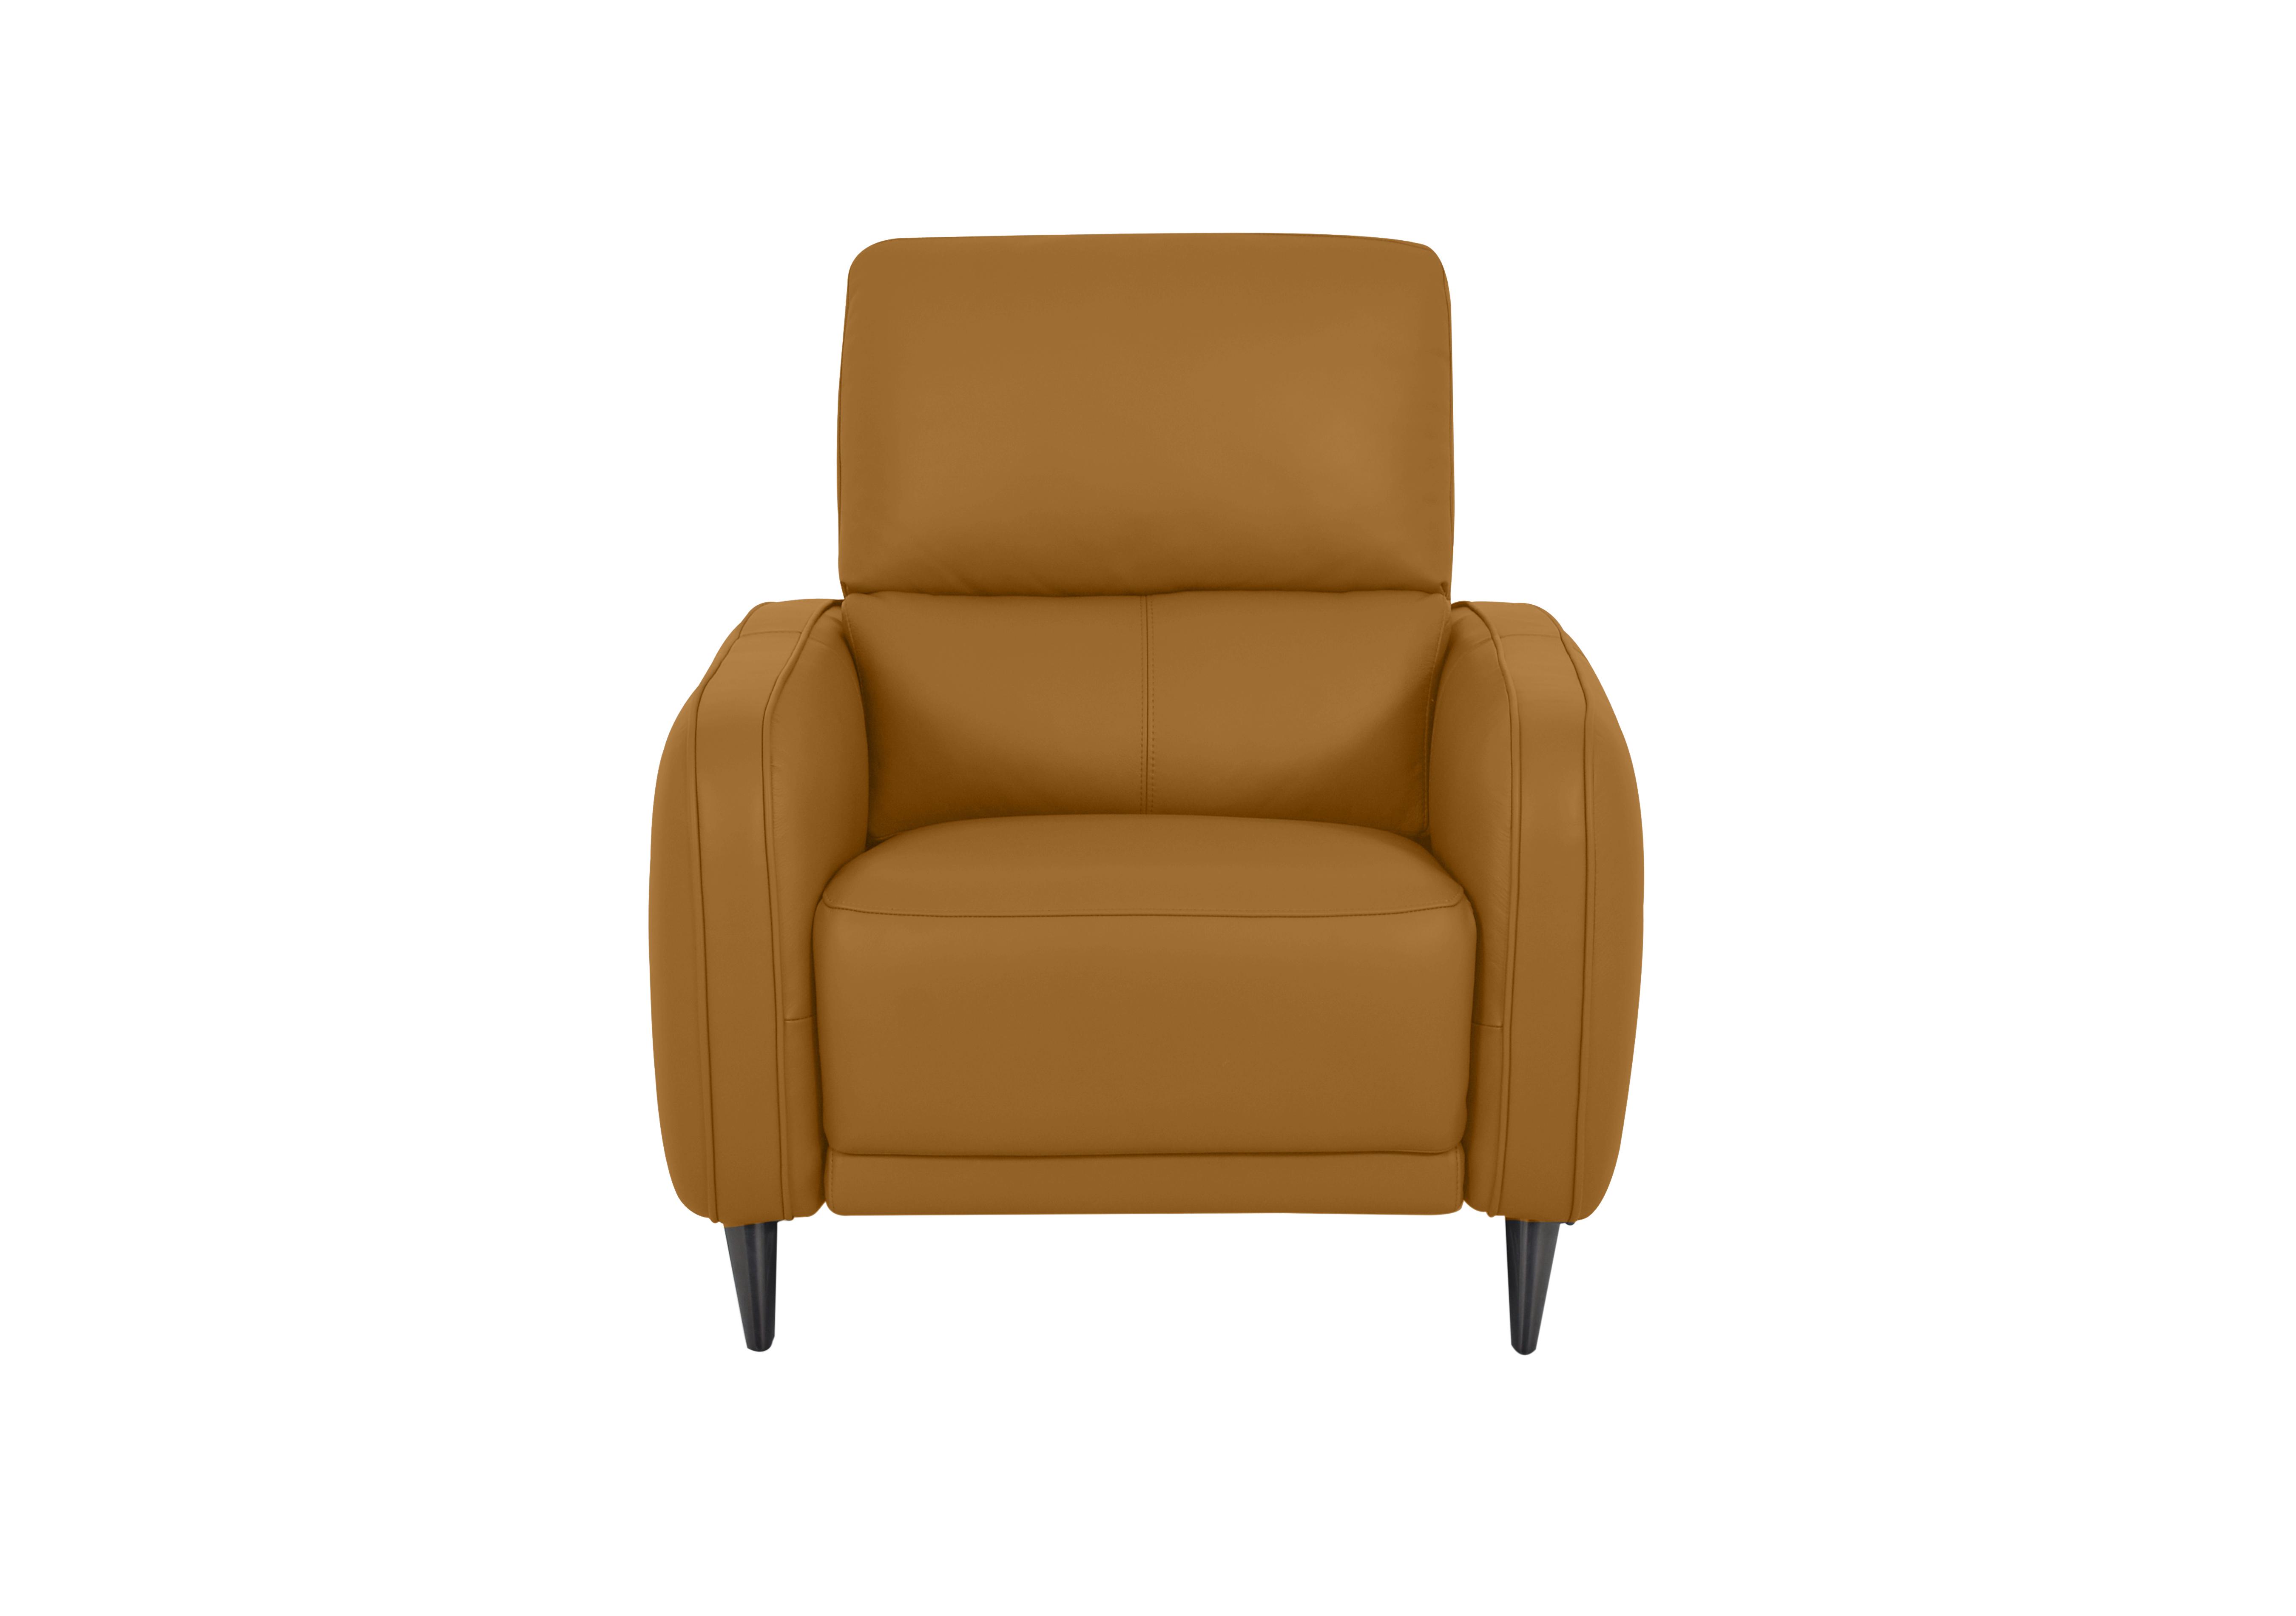 Logan Leather Chair in Np-606e Honey Yellow on Furniture Village